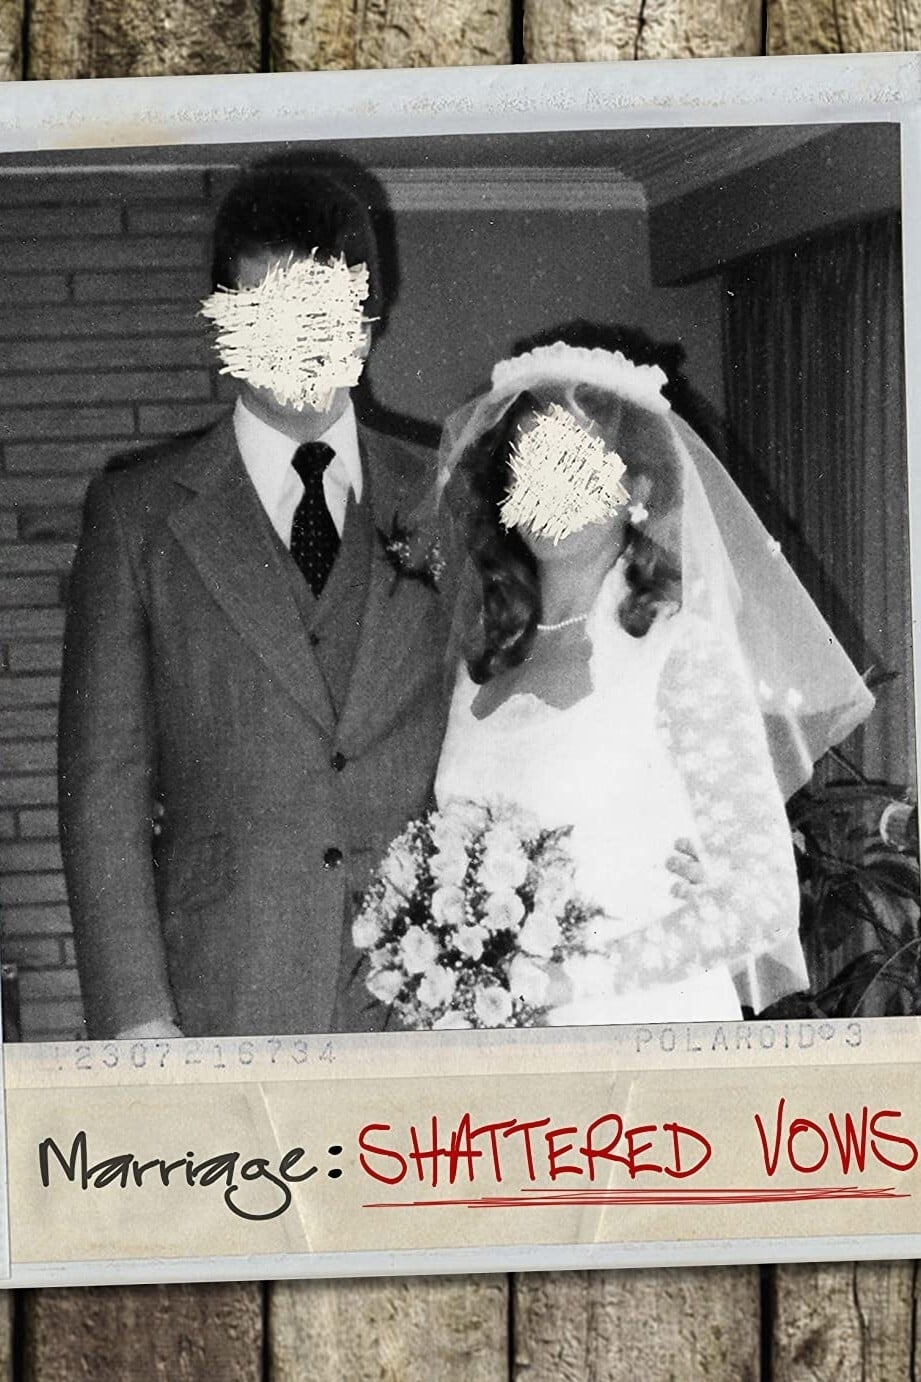 Marriage: Shattered Vows